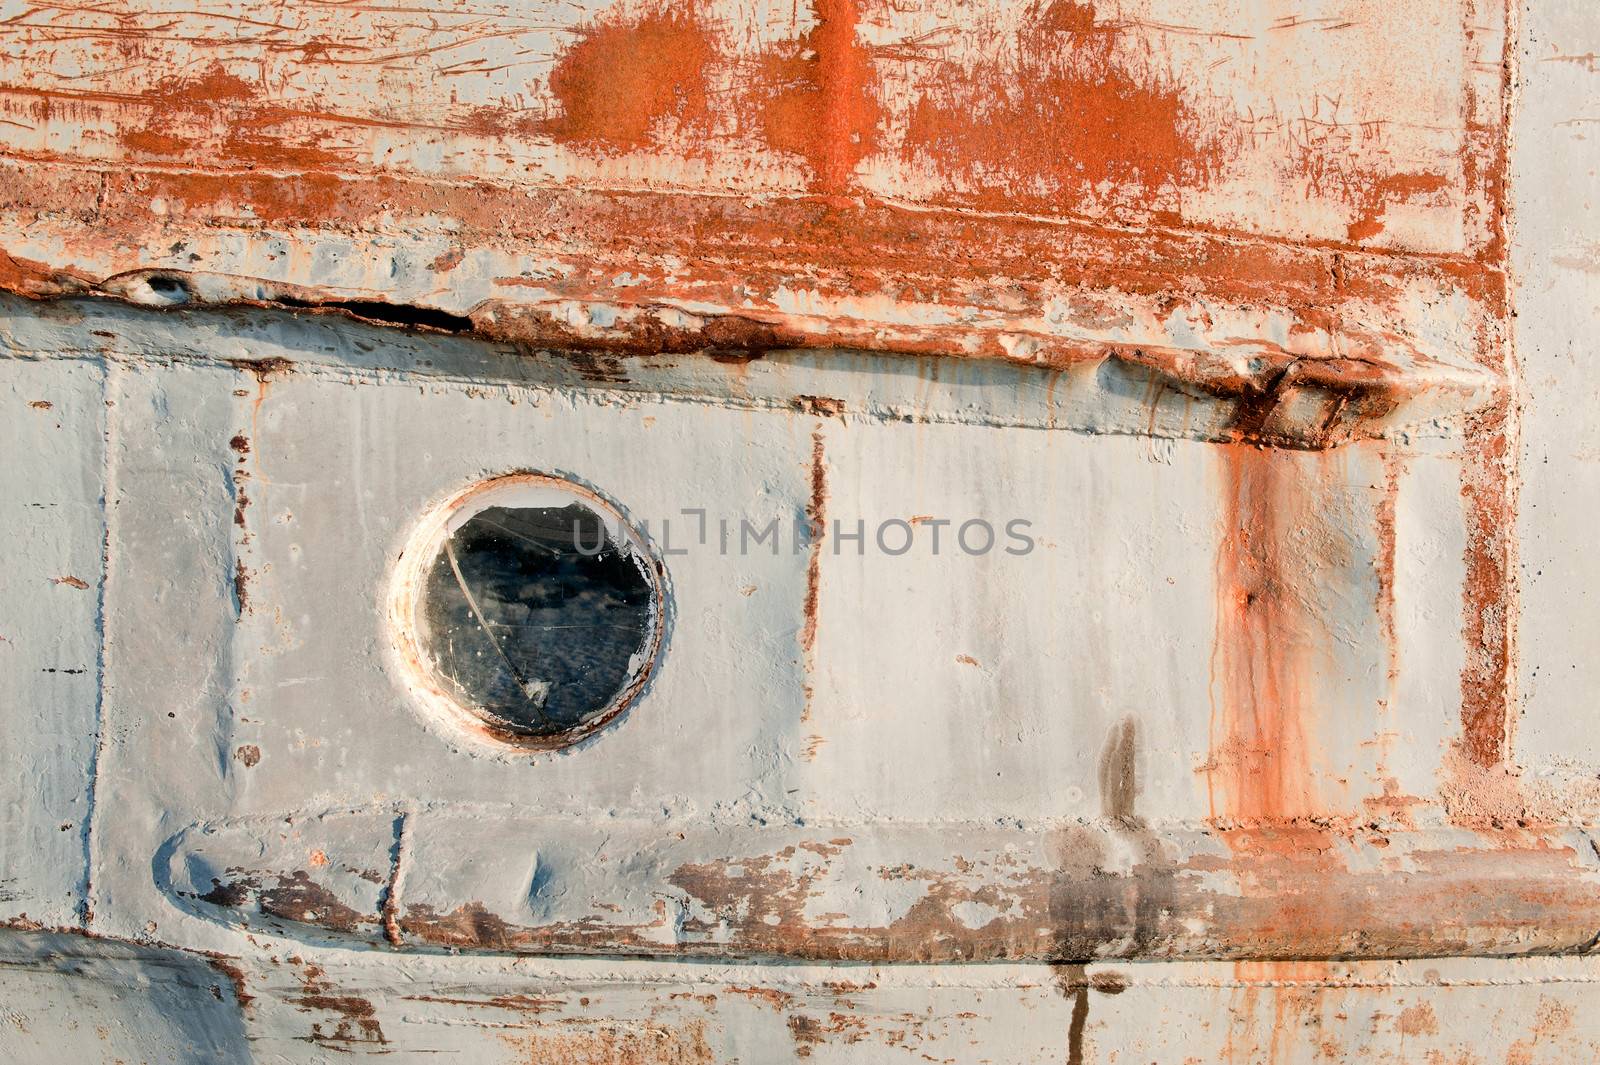 Portholes on the old ships  by SURZ